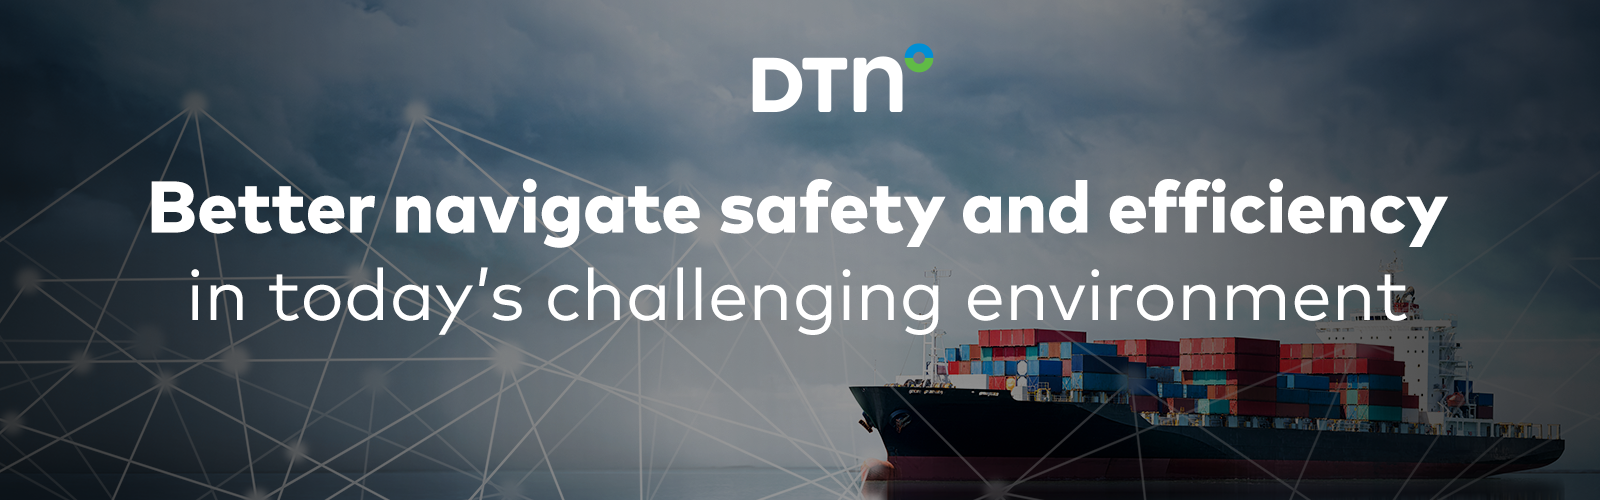 Better navigate safety and efficiency in today’s challenging environment